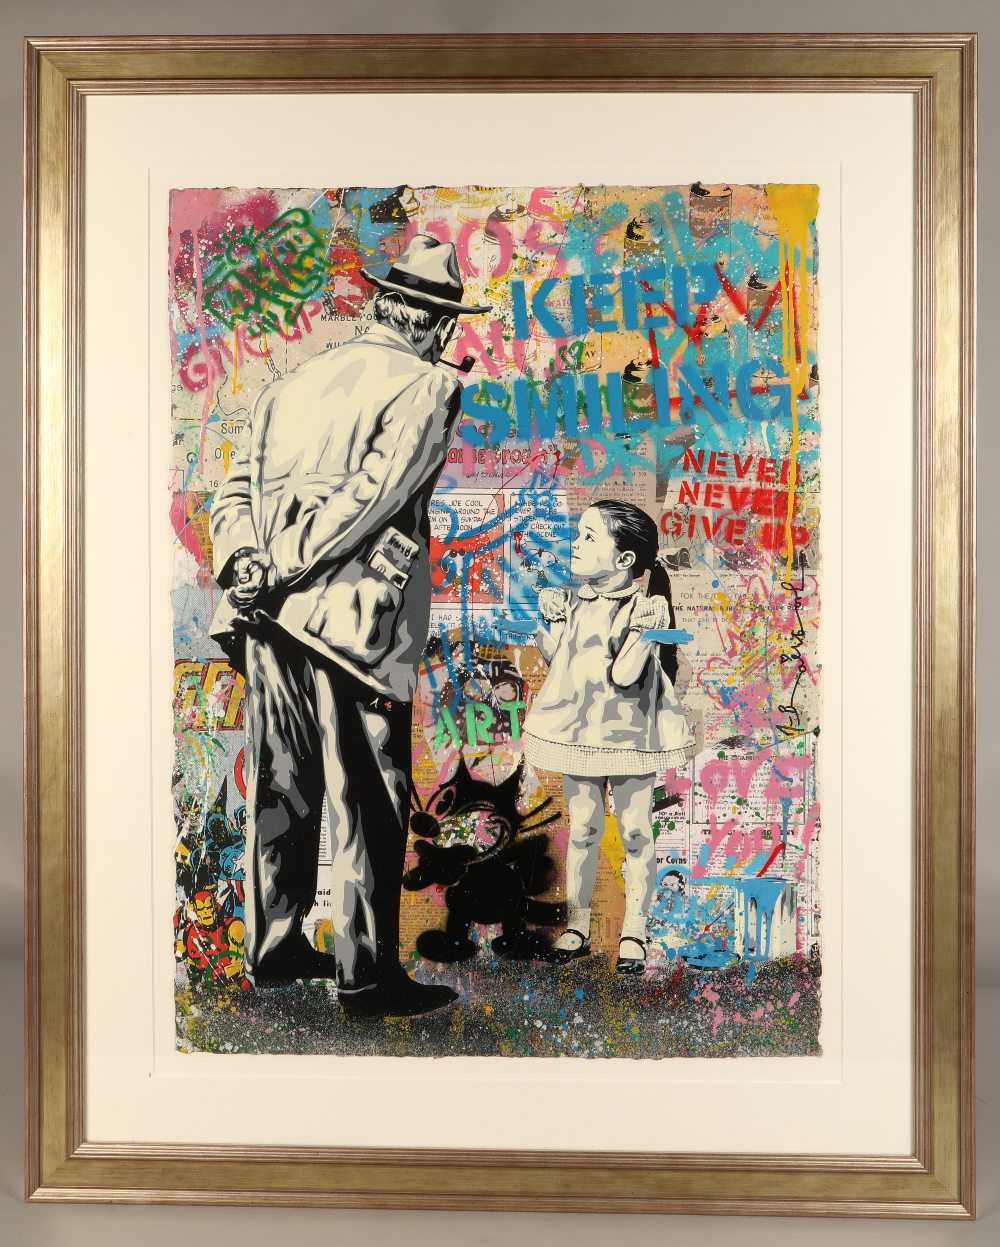 Mr Brainwash (French born 1966) ARR Silver framed silkscreen and original mixed media on paper, - Image 2 of 6